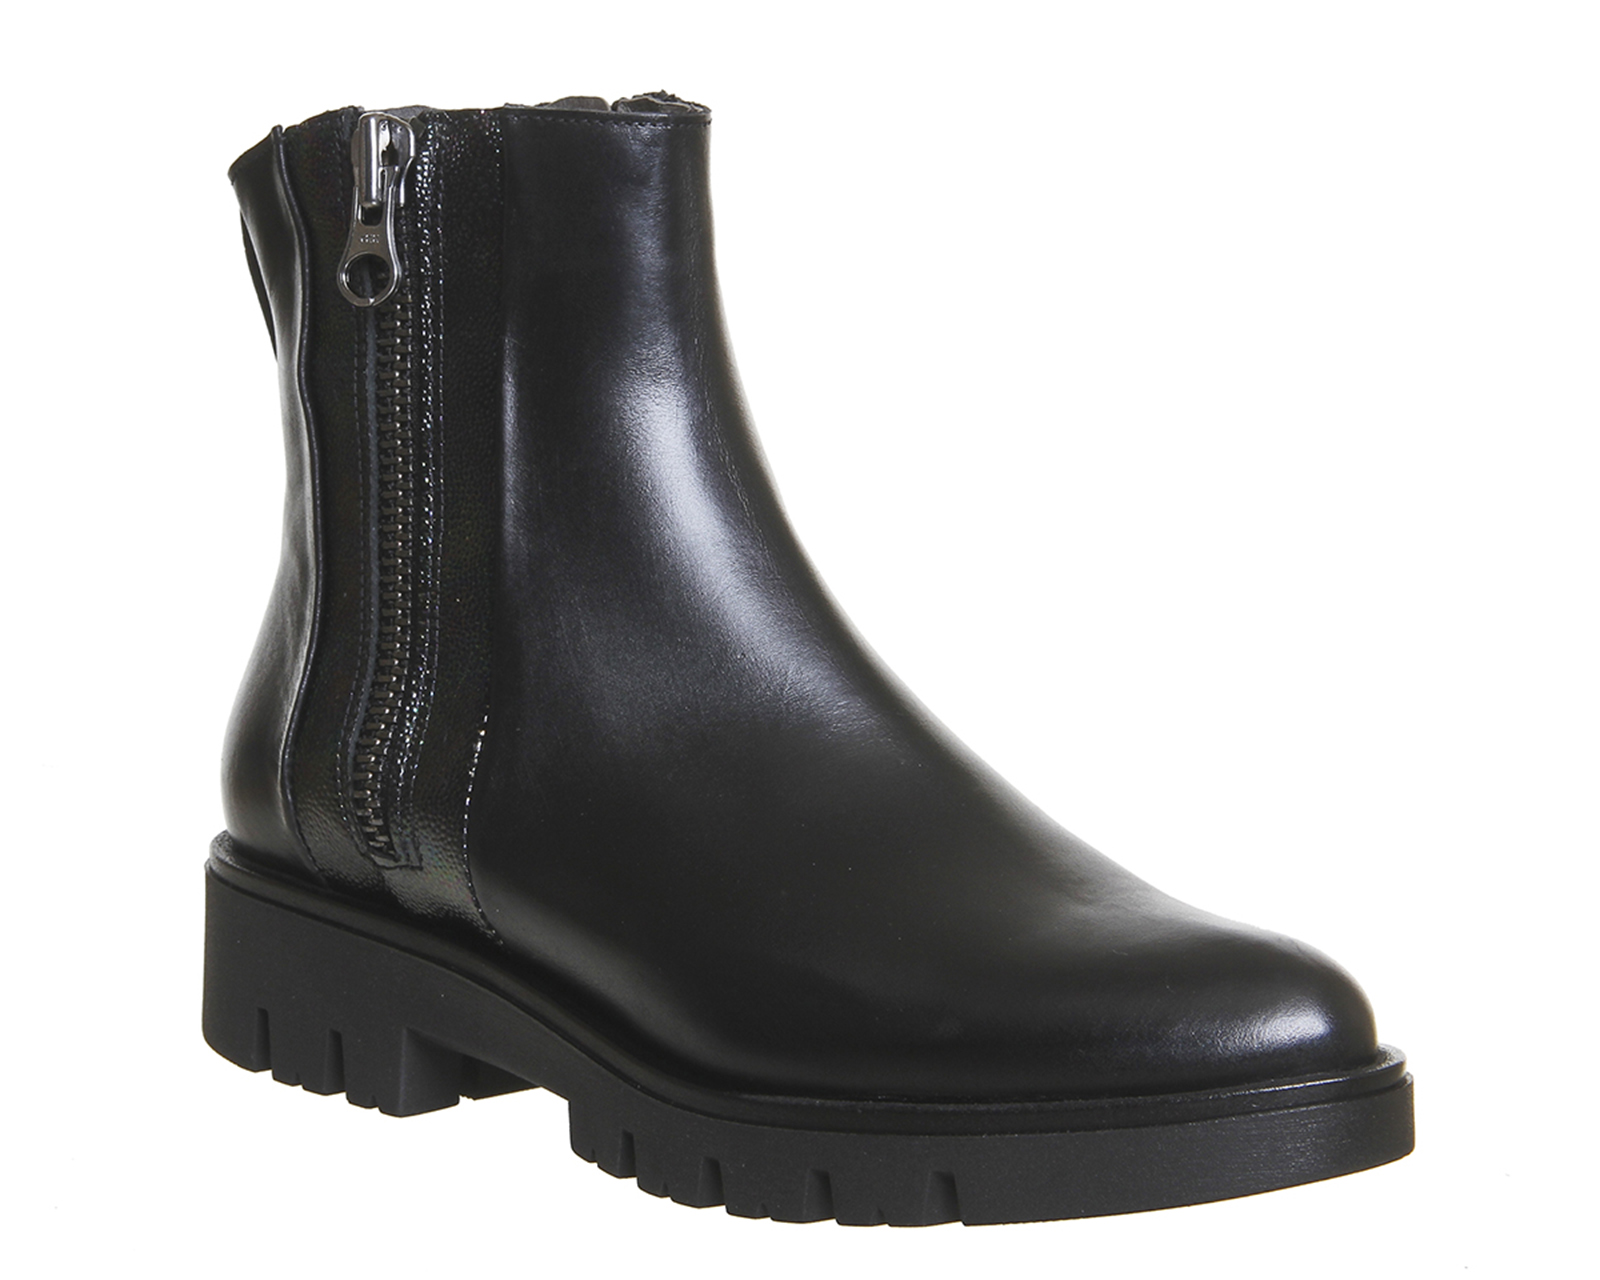 Gaimo for OFFICERosa Ankle BootsBlack Iridescent Leather